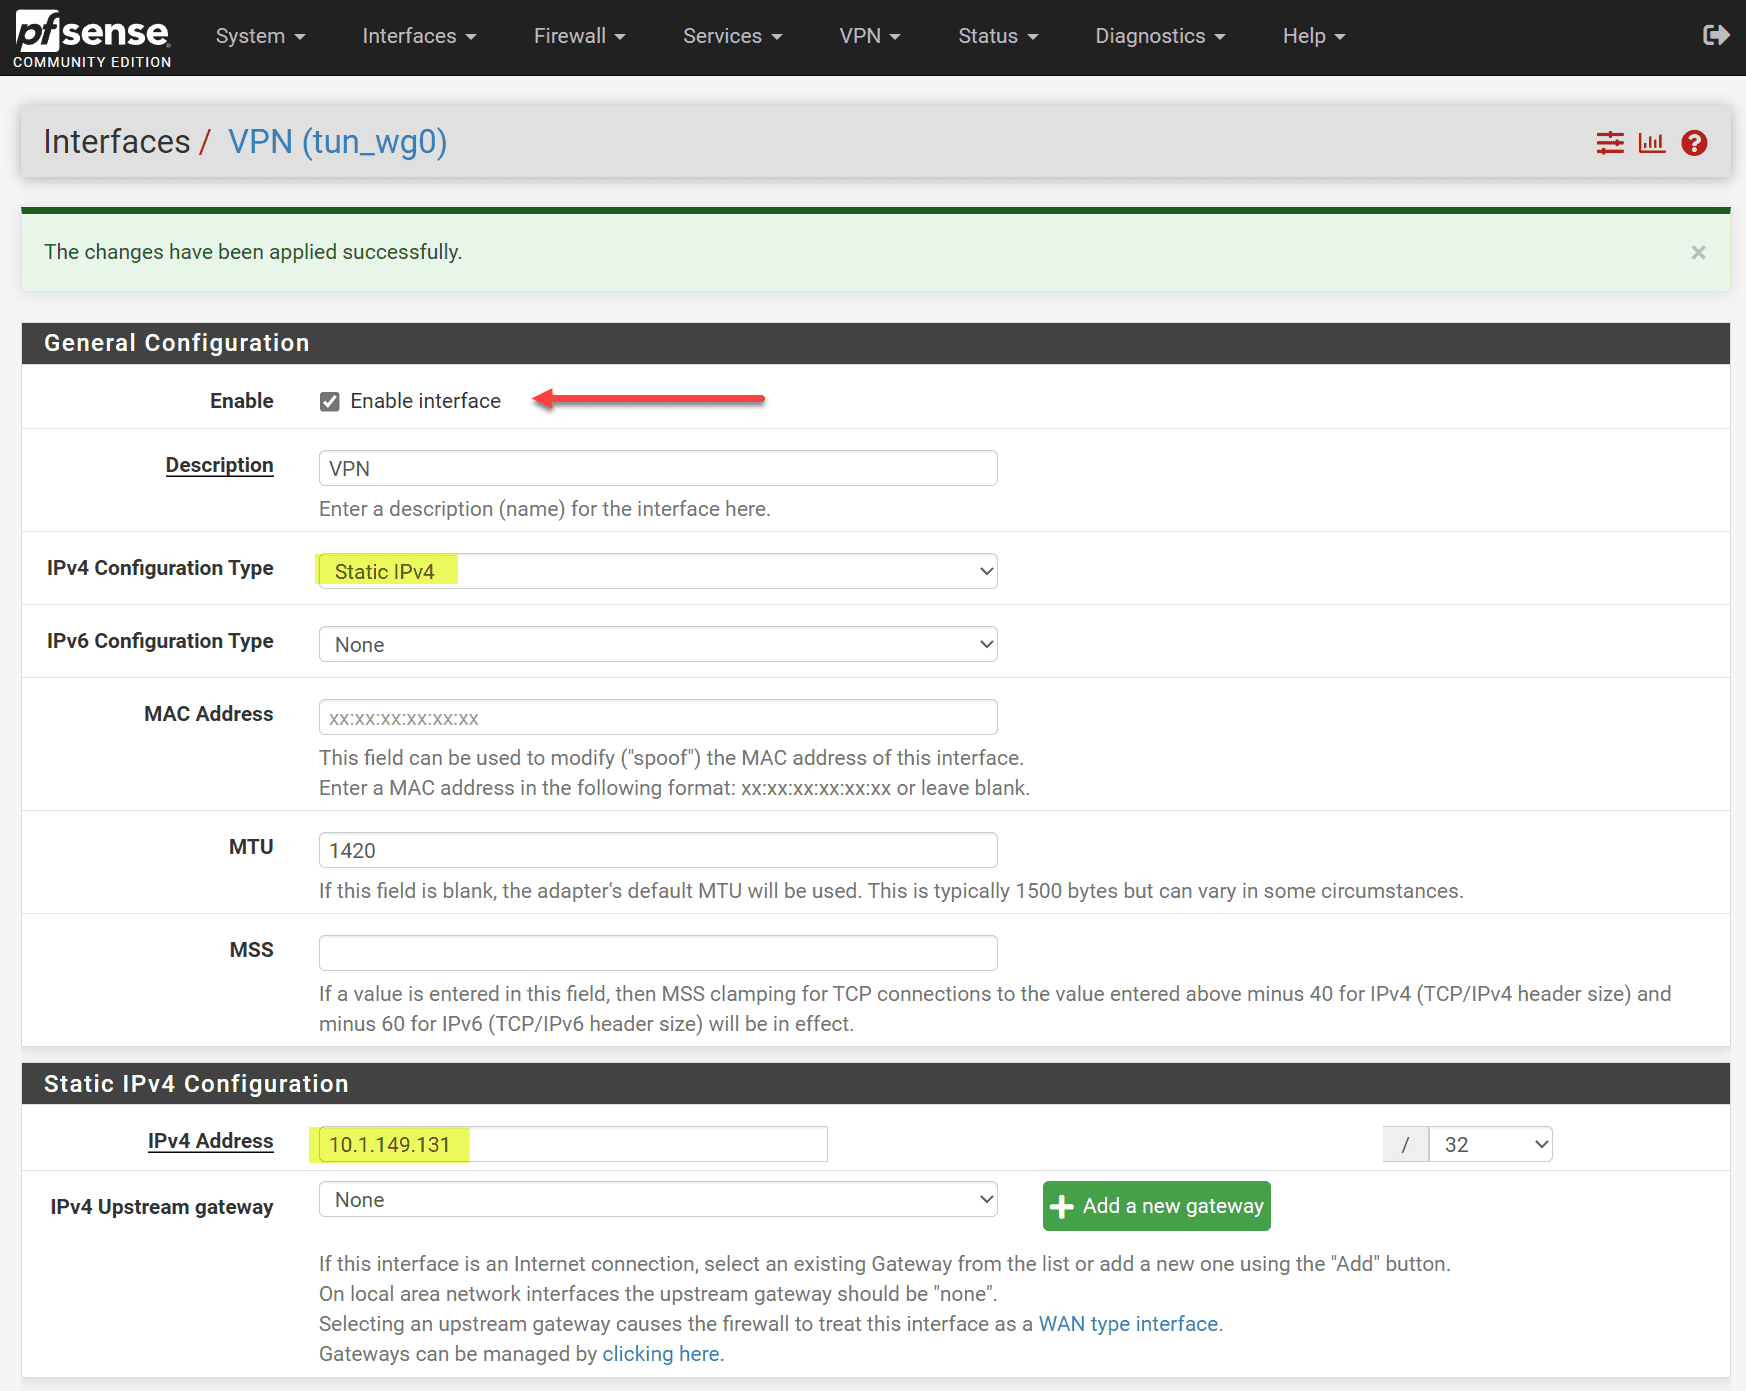 Enabling the Wireguard interface and configuring the IP address information